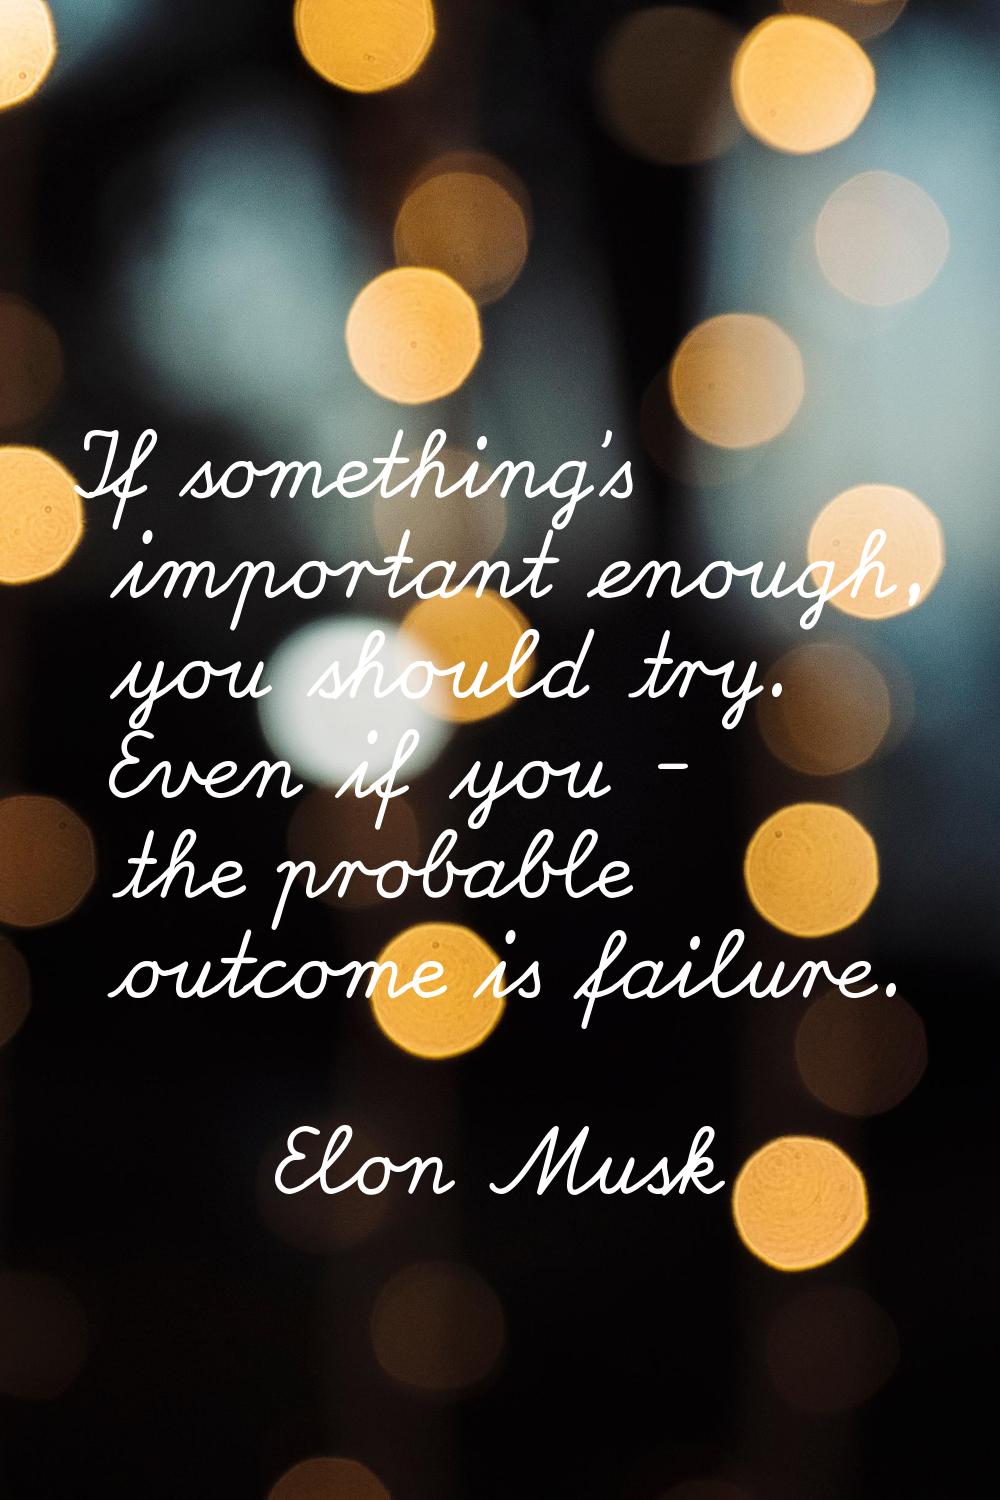 If something's important enough, you should try. Even if you - the probable outcome is failure.